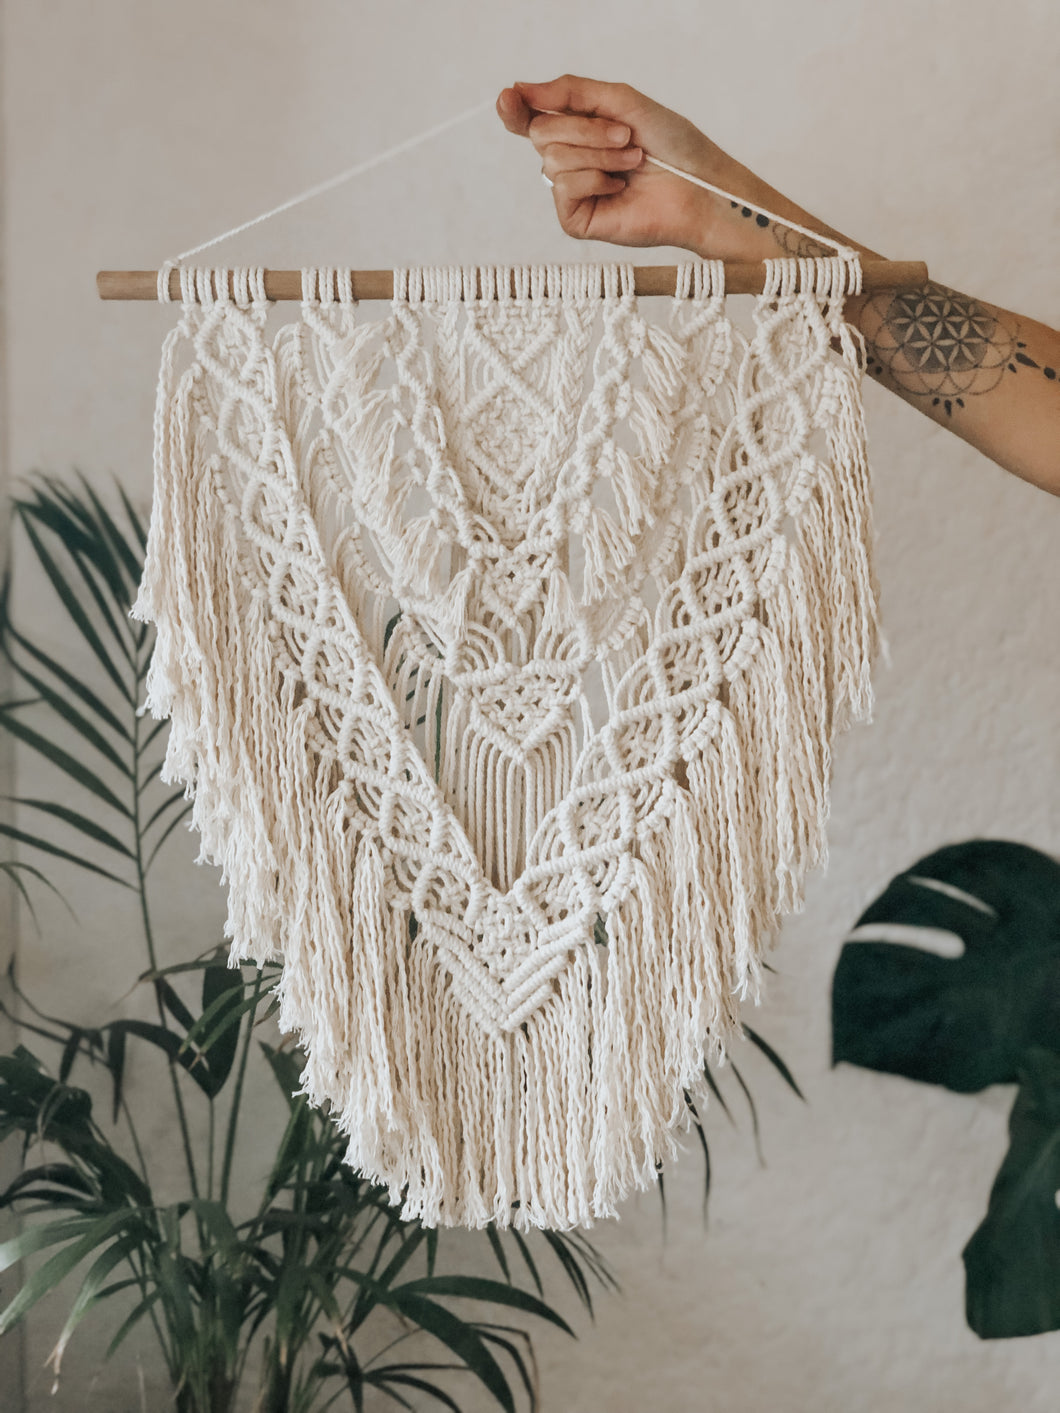 Miri macrame wall hanging. It's a fun multi-layered piece with it's unravelled fringe. A beautiful addition to any space.